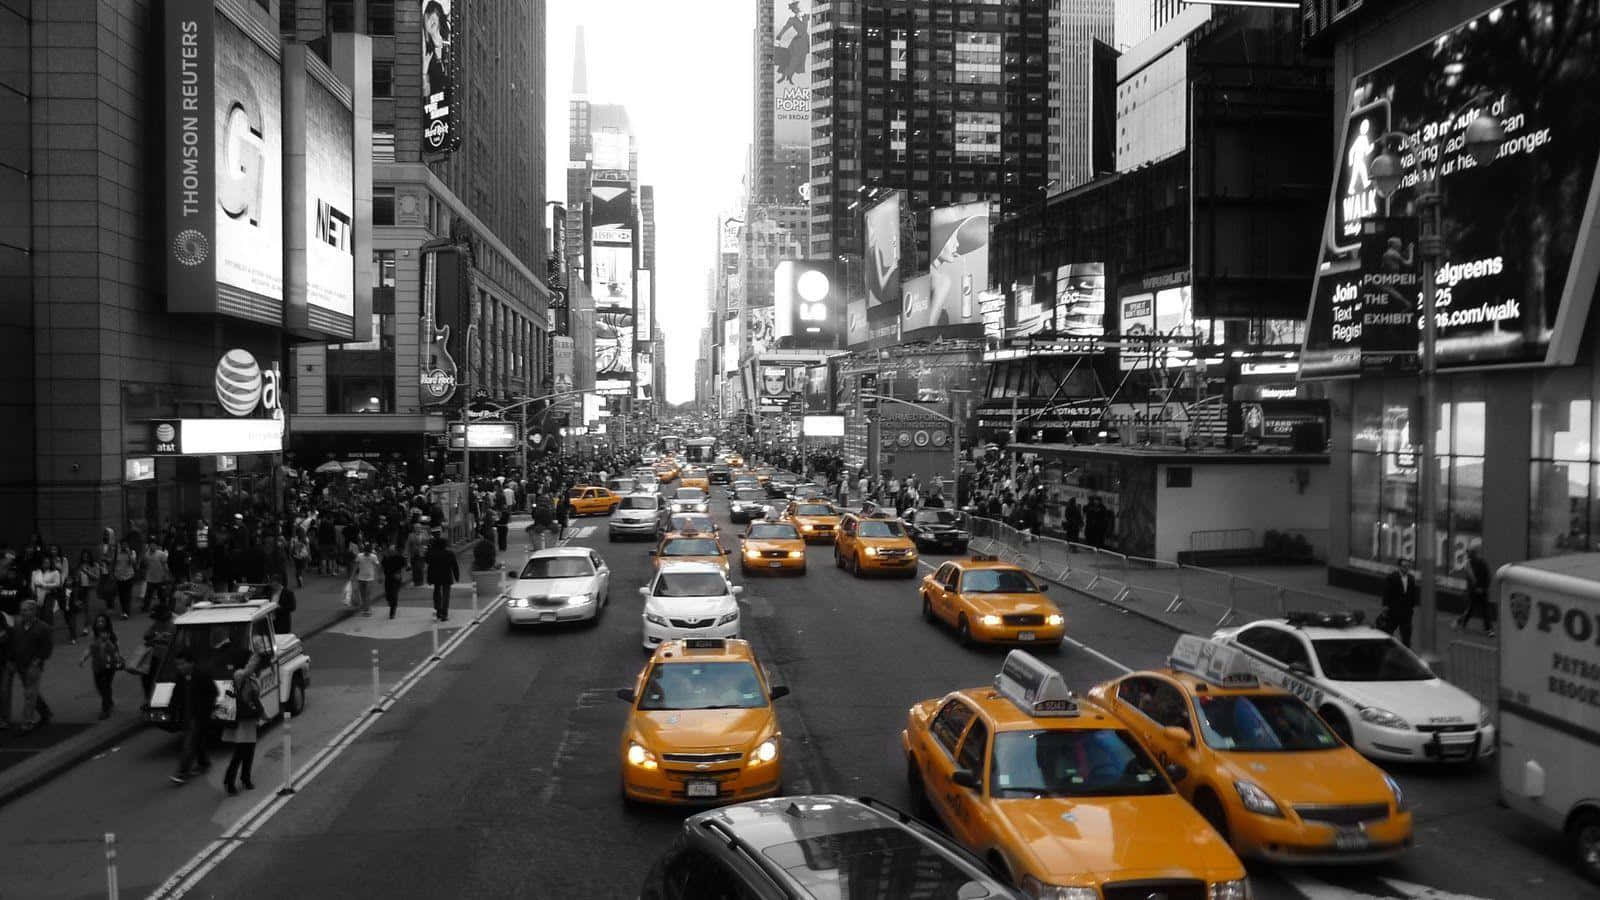 A Black And White Photo Of A City With Yellow Taxis